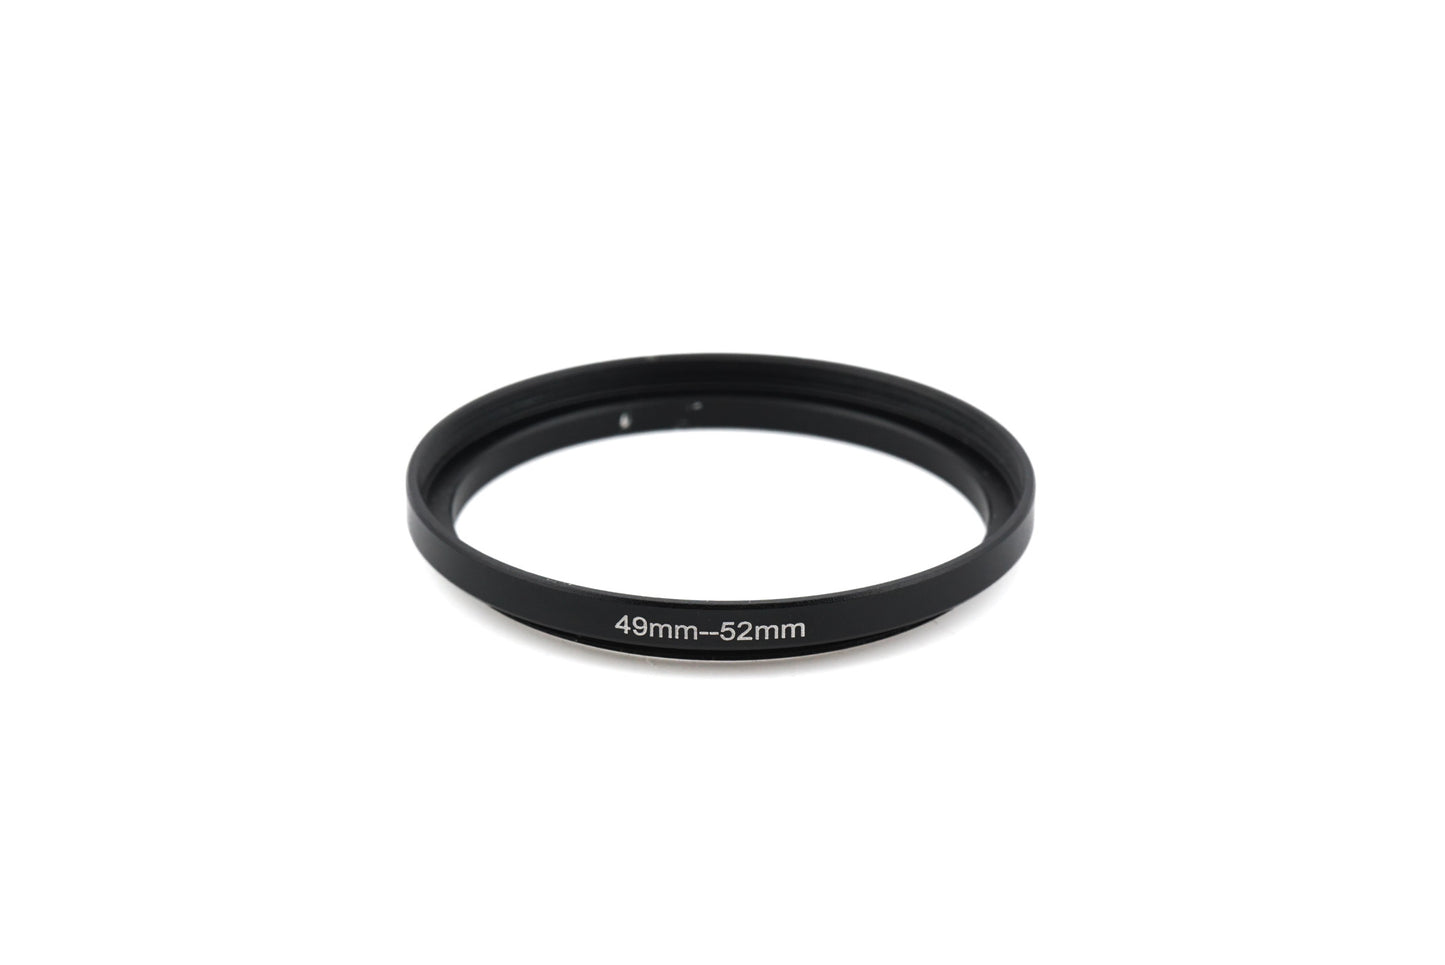 Generic 49mm - 52mm Step-Up Ring